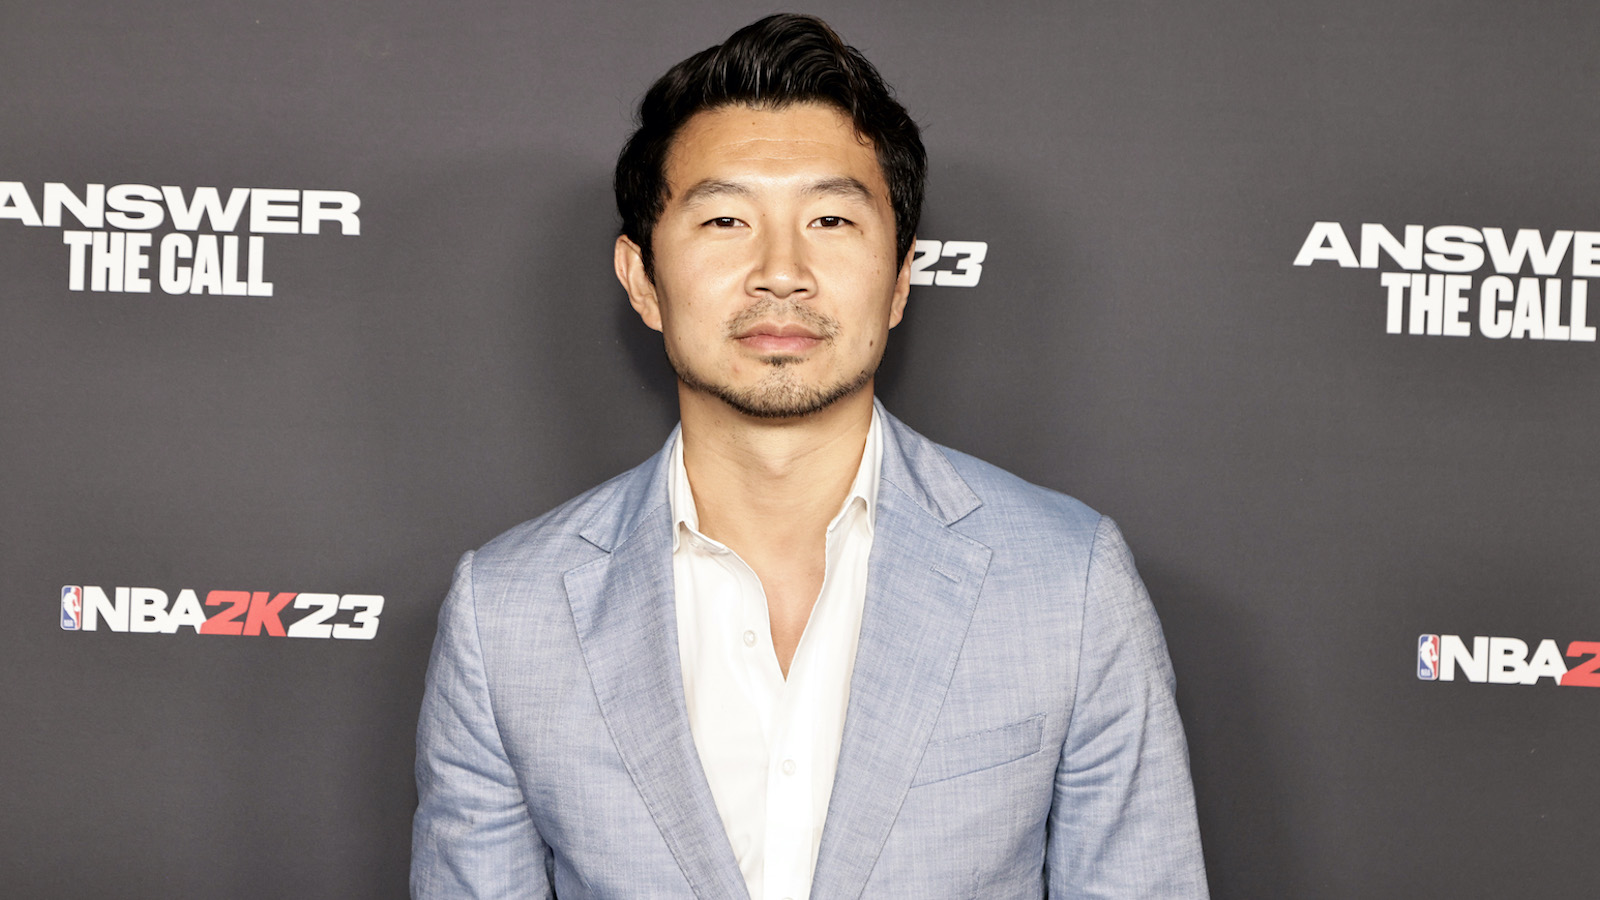 Simu Liu’s disturbing alleged Reddit history resurfaces after his divisive comments on Chadwick Boseman 